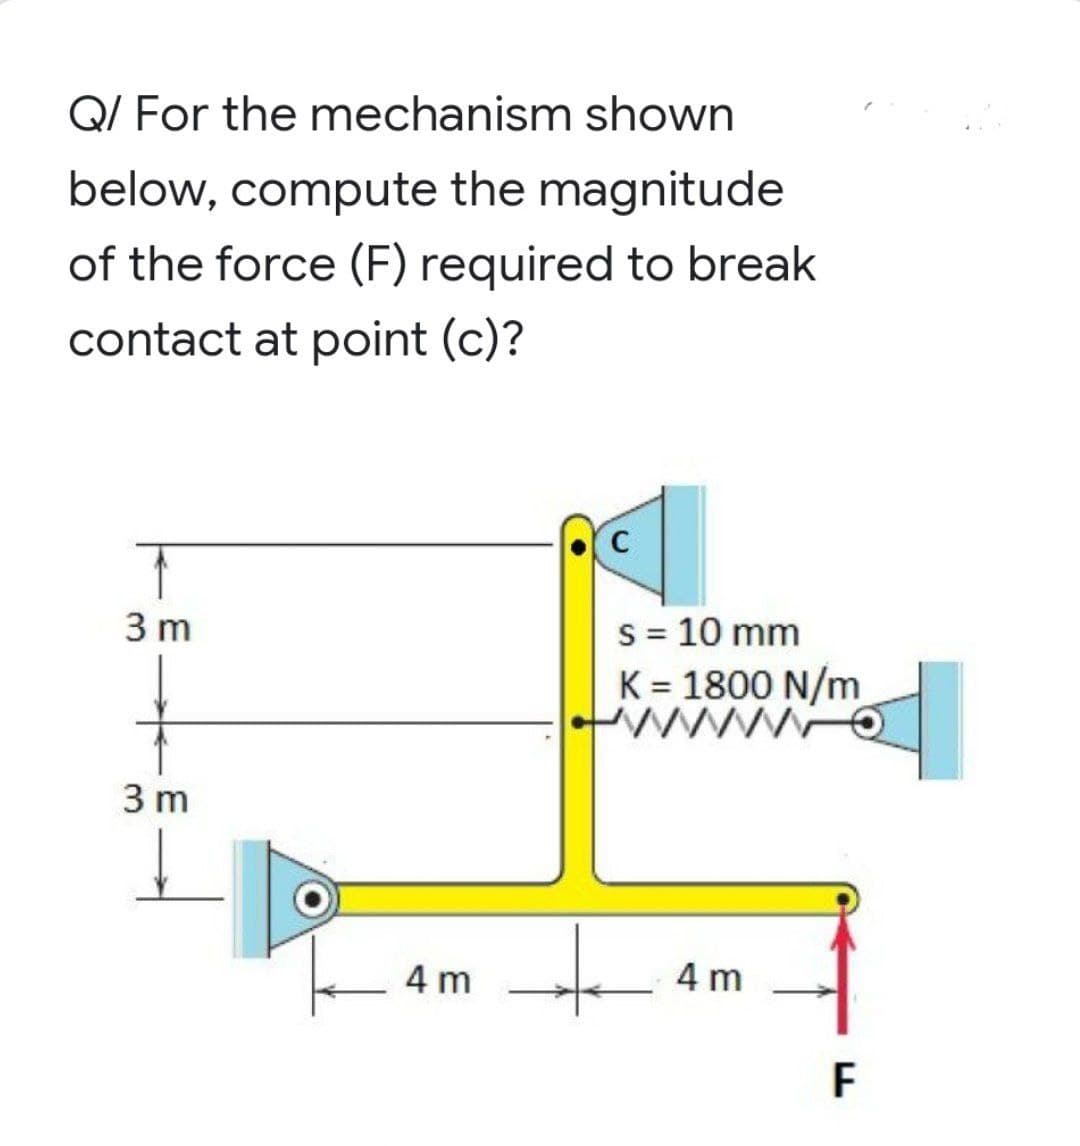 Q/ For the mechanism shown
below, compute the magnitude
of the force (F) required to break
contact at point (c)?
T
3 m
s = 10 mm
K = 1800 N/m
www.o
3 m
4 m
4 m
F